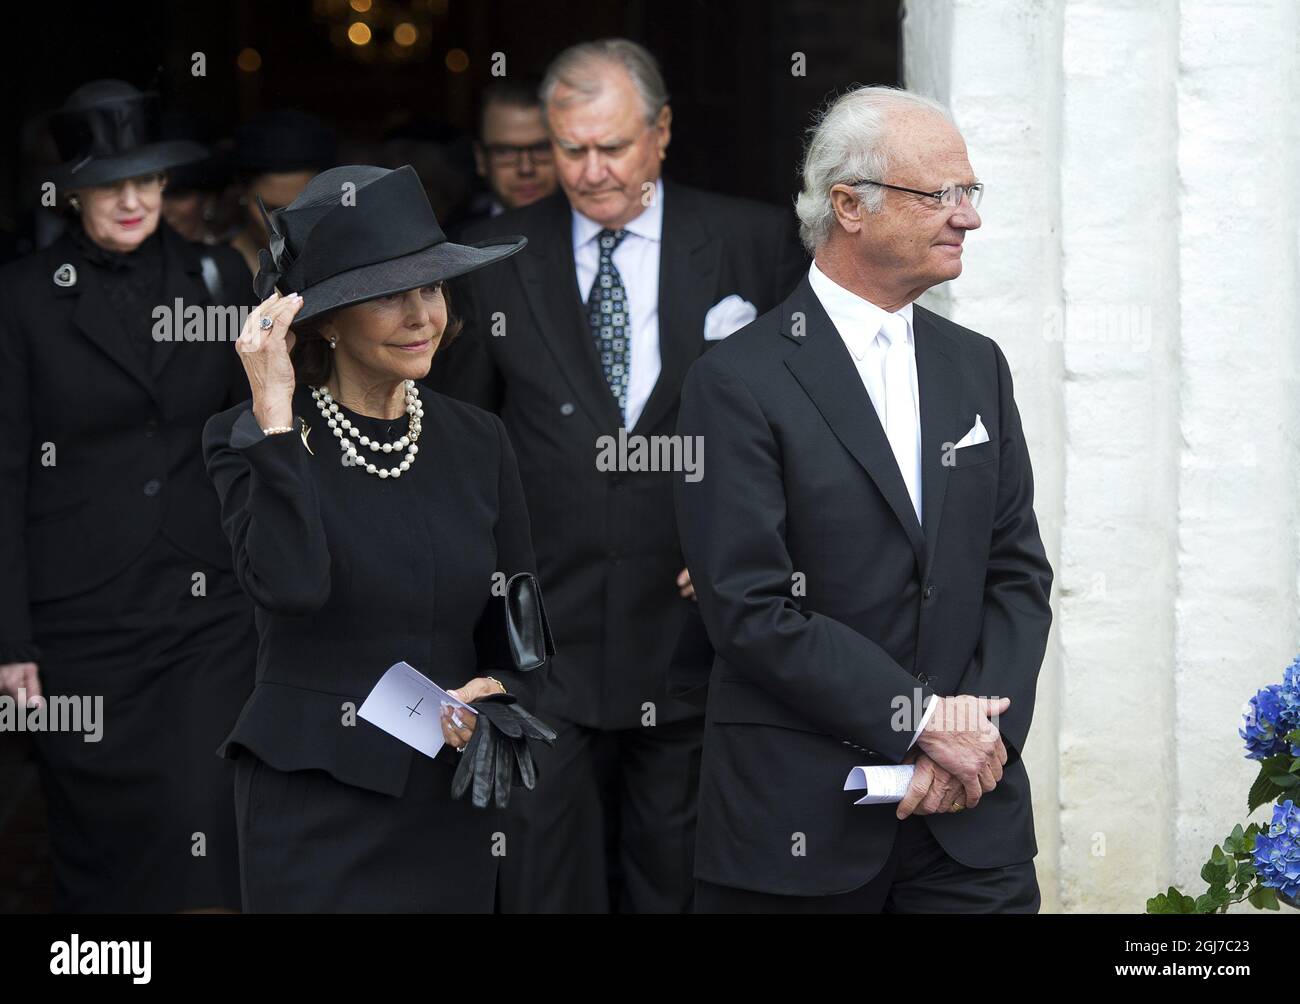 BASTAD 2012-05-14 Queen Margreth and Prince Consort Henrik of Denmark and Queen Silvia and King Carl Gustaf of Sweden during the funeral of Count Carl Johan Bernadotte in the Maria Church in Bastad, Sweden, May 14, 2012. Foto: Suvad Mrkonjic / XP / SCANPIX / kod 7116 ** OUT SWEDEN OUT T ** Stock Photo